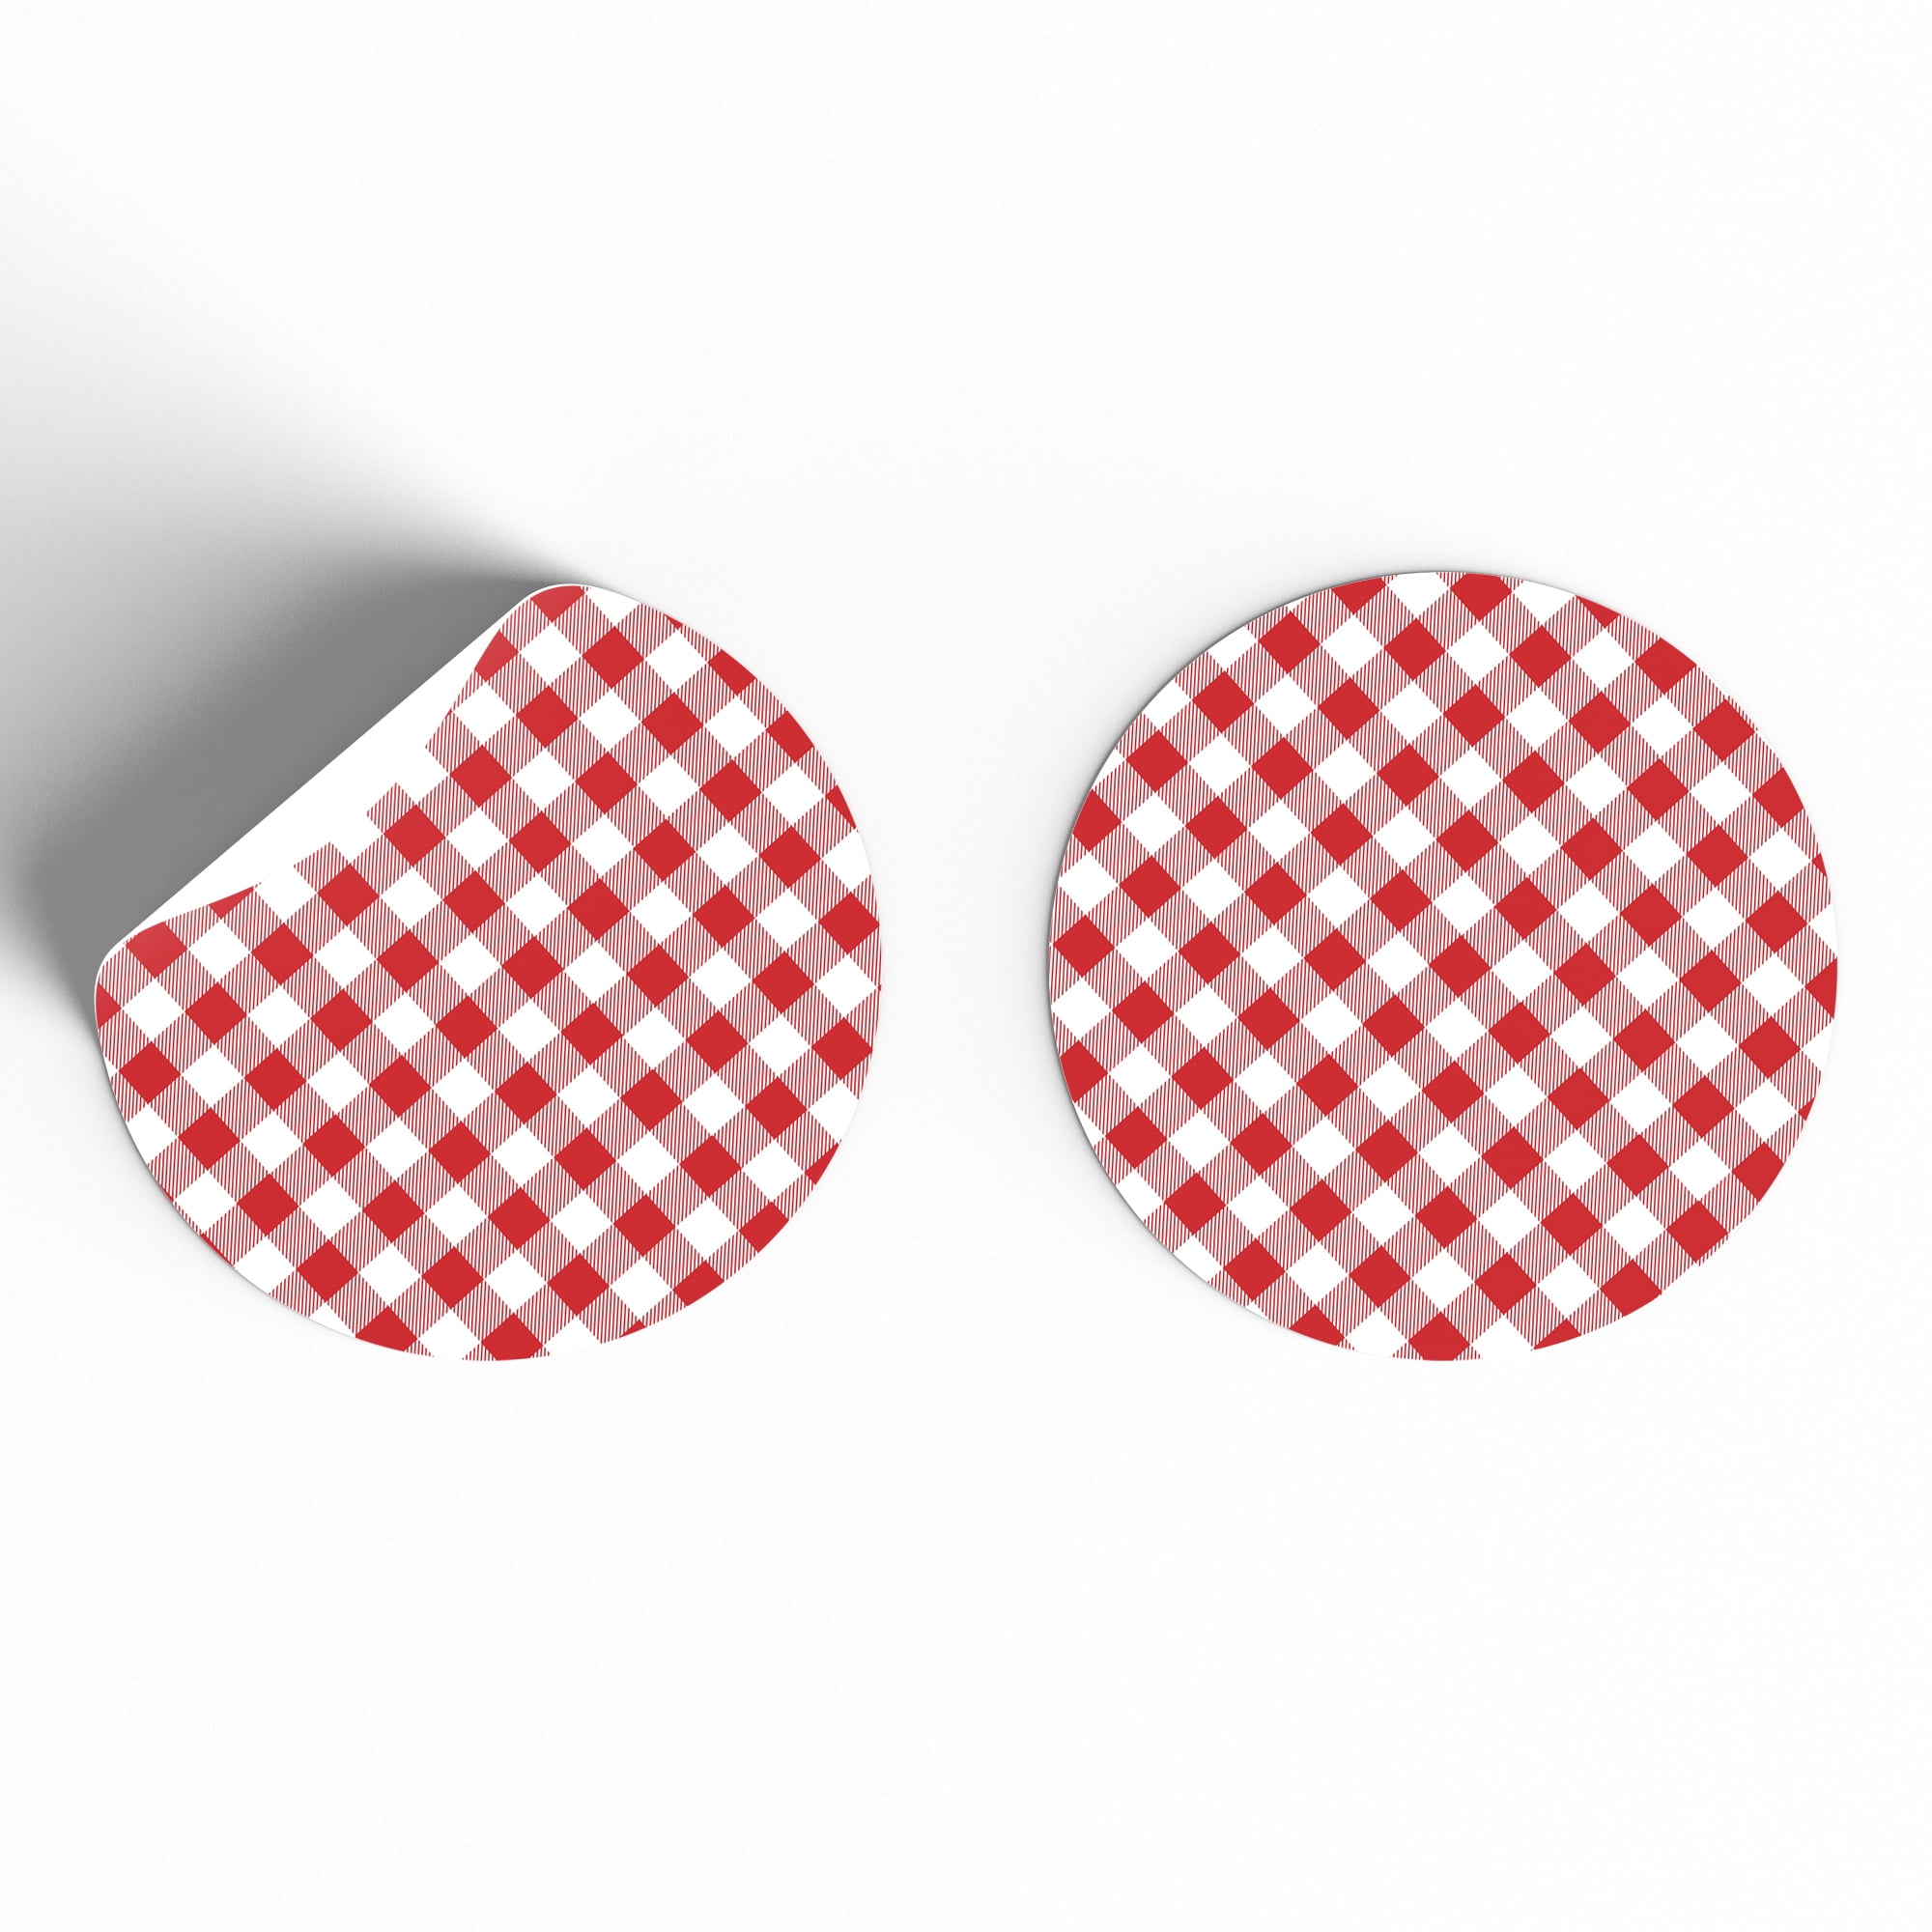 New Creation Avenue Brand Silicone Tortilla Press Liners / Round Baking Mat 2- Pack Red/White Checked